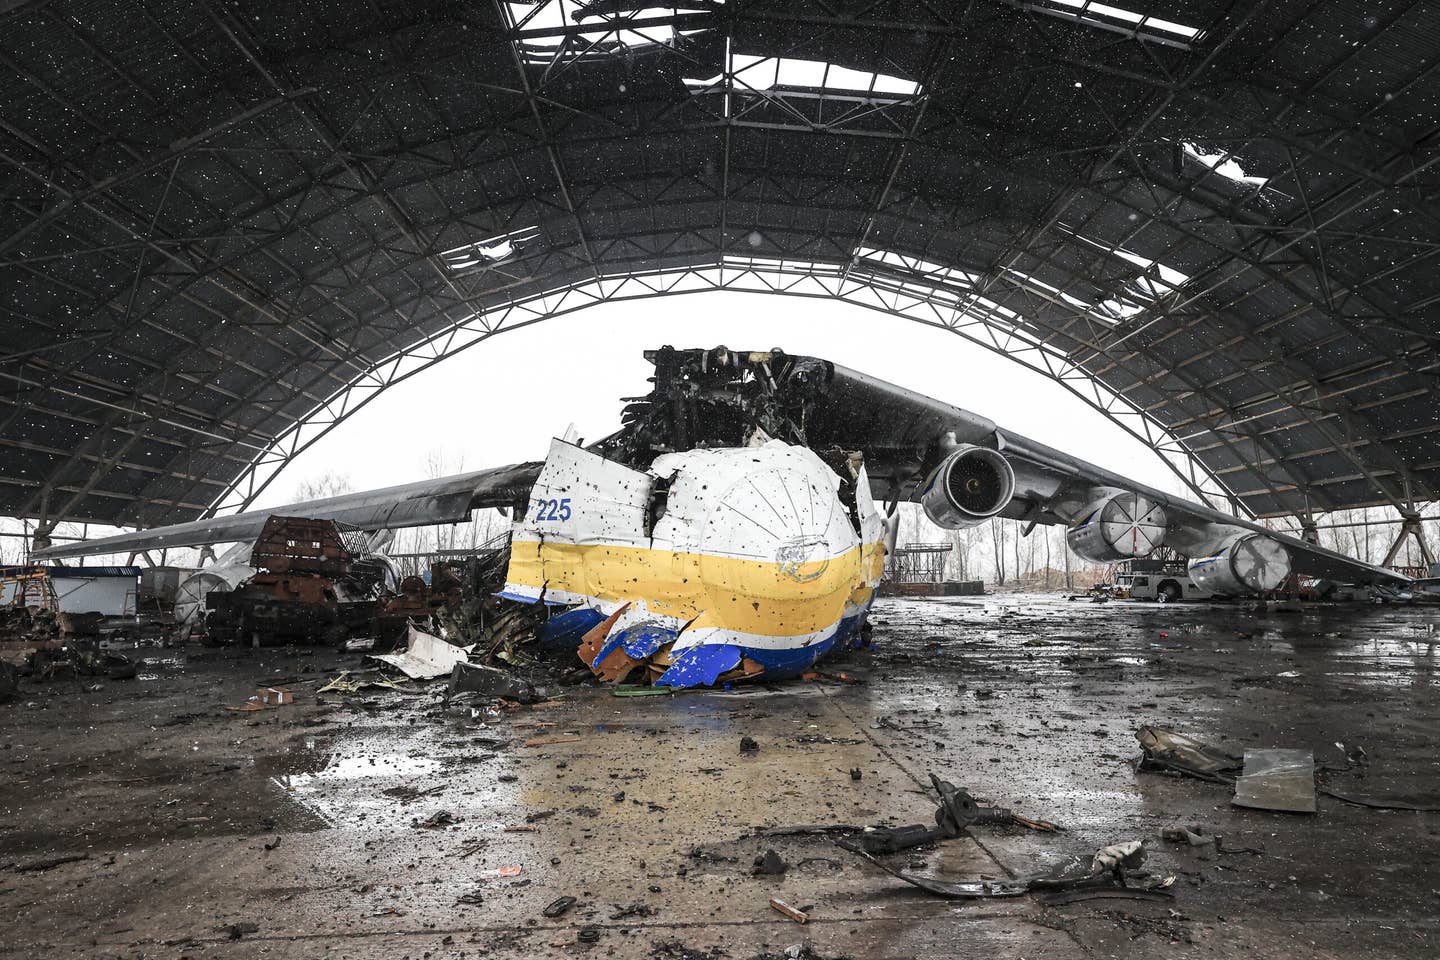 The wreckage of An-225 Mriya cargo plane that was destroyed by Russian shelling at Hostomel Airport, Ukraine on April 3, 2022. <em>Photo by Metin Aktas/Anadolu Agency via Getty Images</em>